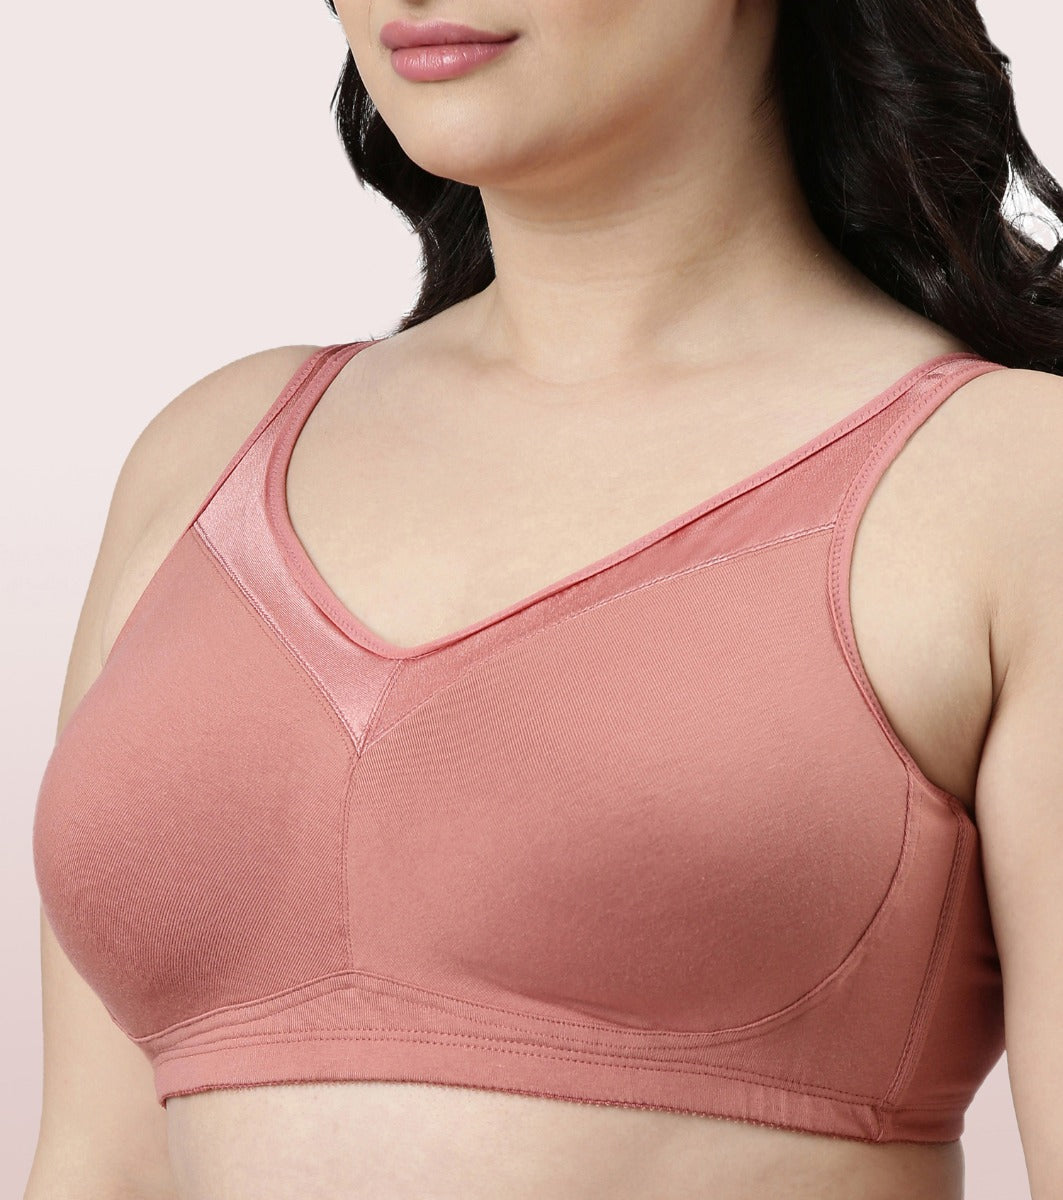 Enamor Support Bra For Womens in Hooghly - Dealers, Manufacturers